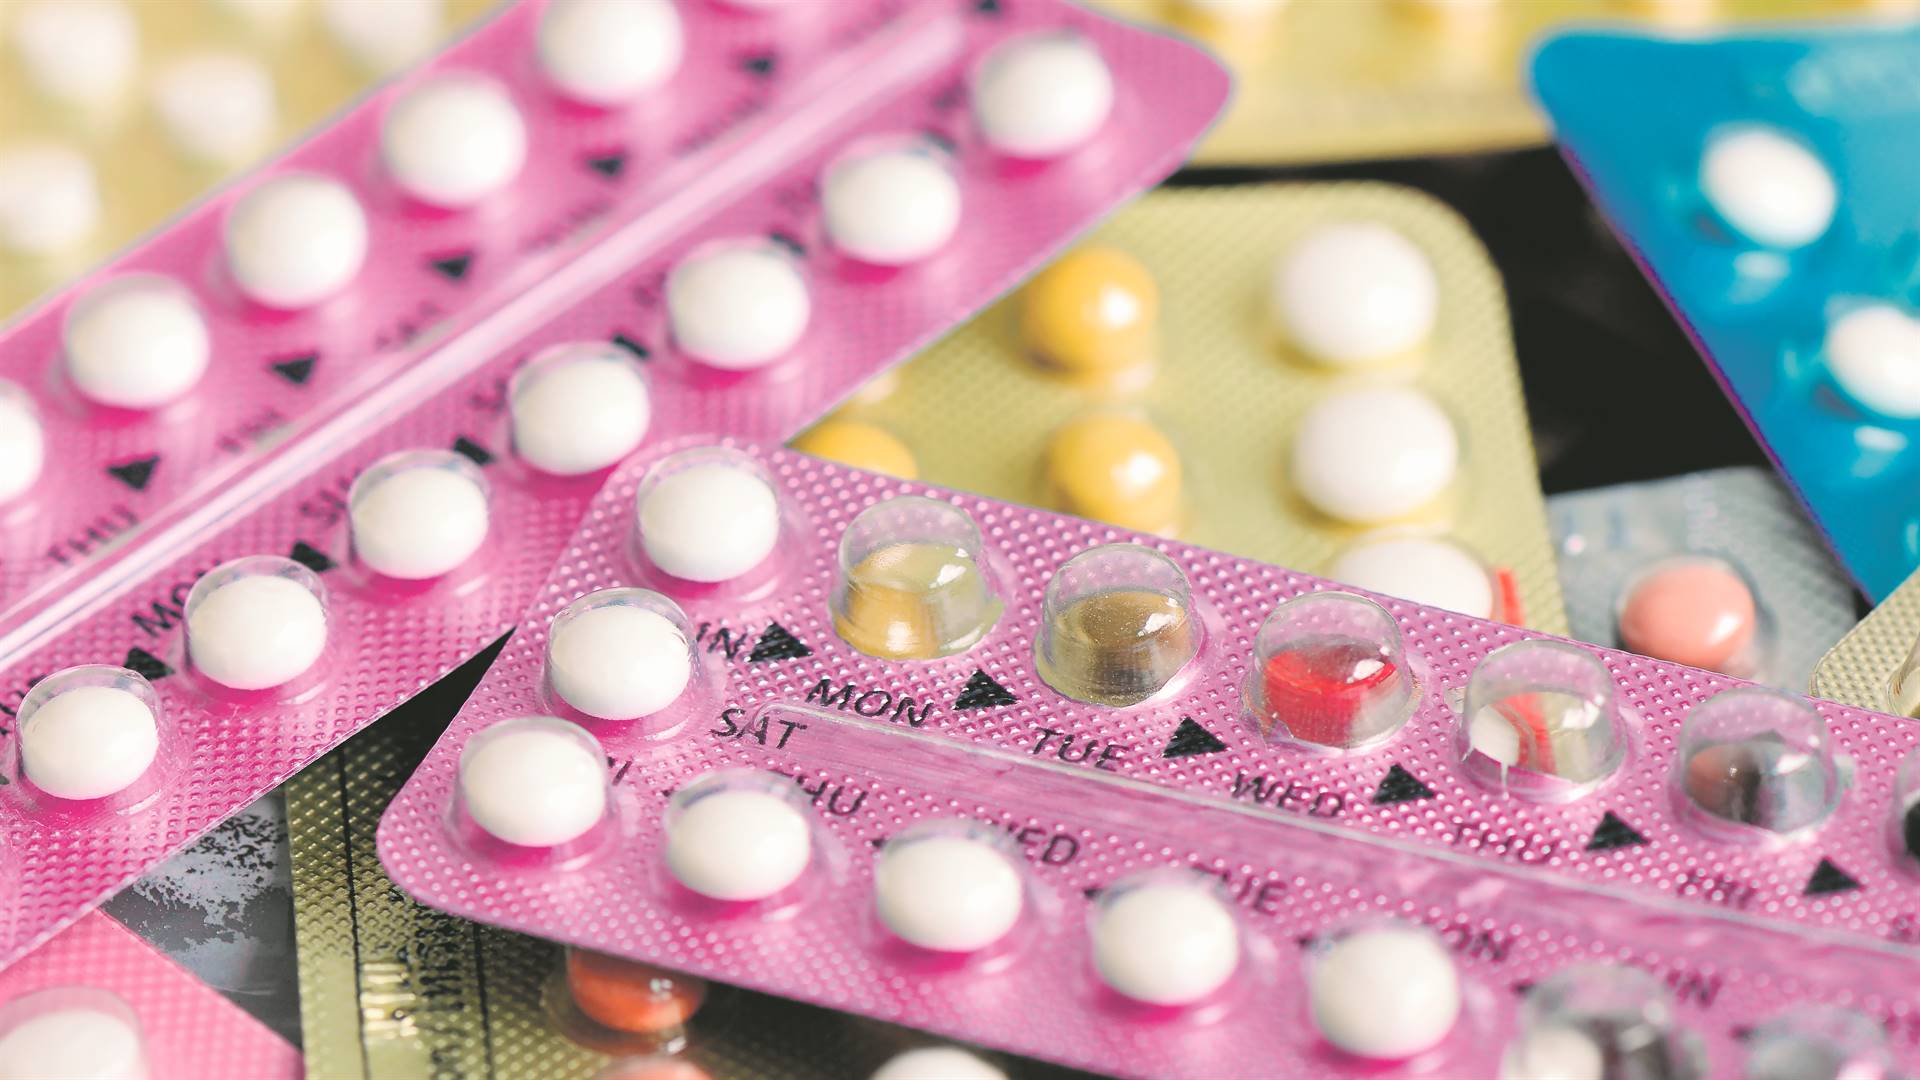 Contraceptives give women bodily autonomy by affording them choice regarding reproduction. Photo: File